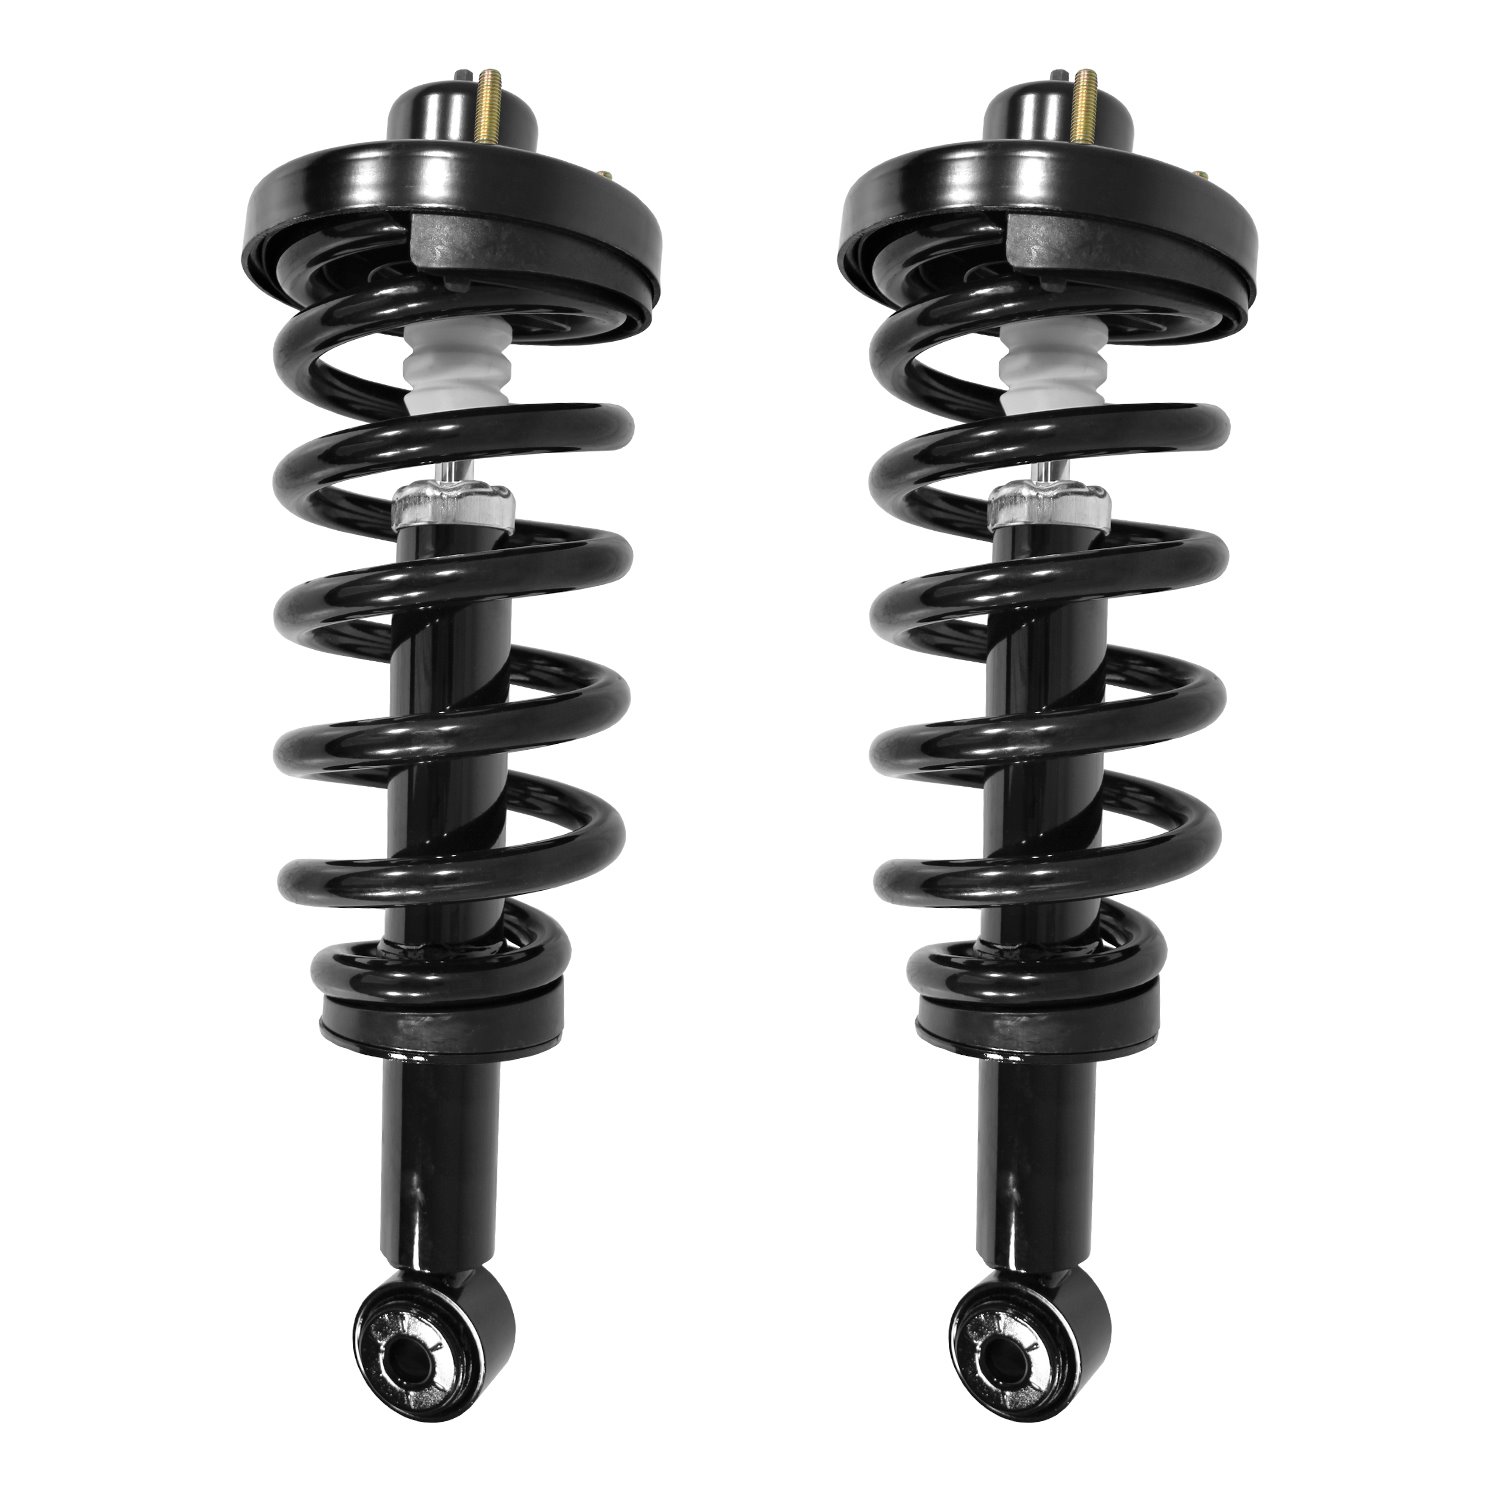 2-15410-001 Suspension Strut & Coil Spring Assembly Set Fits Select Ford Expedition, Lincoln Navigator